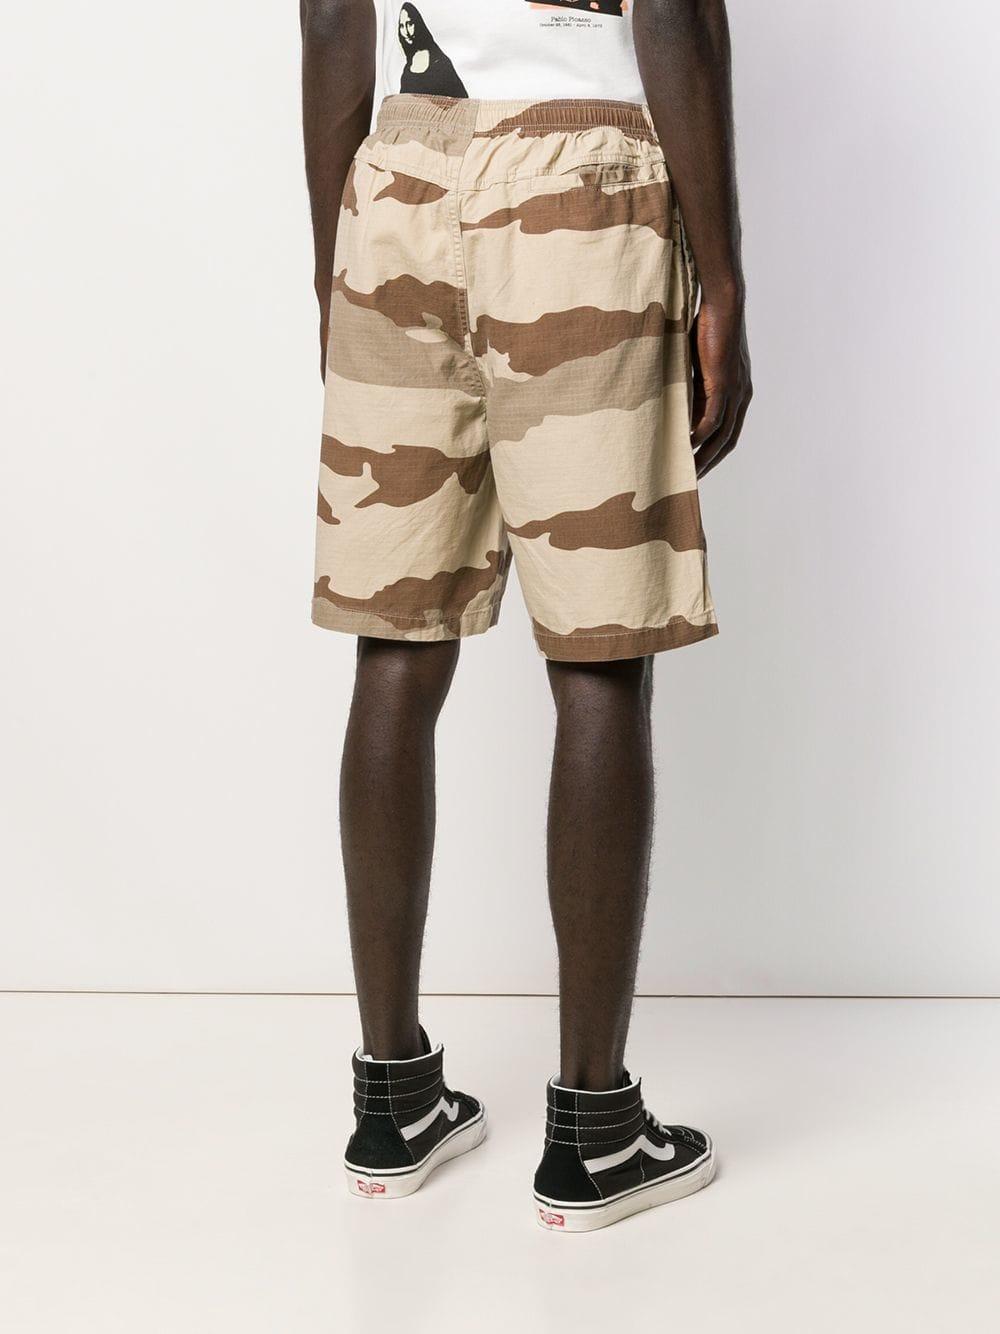 Stussy Camouflage Print Shorts in Natural for Men - Lyst